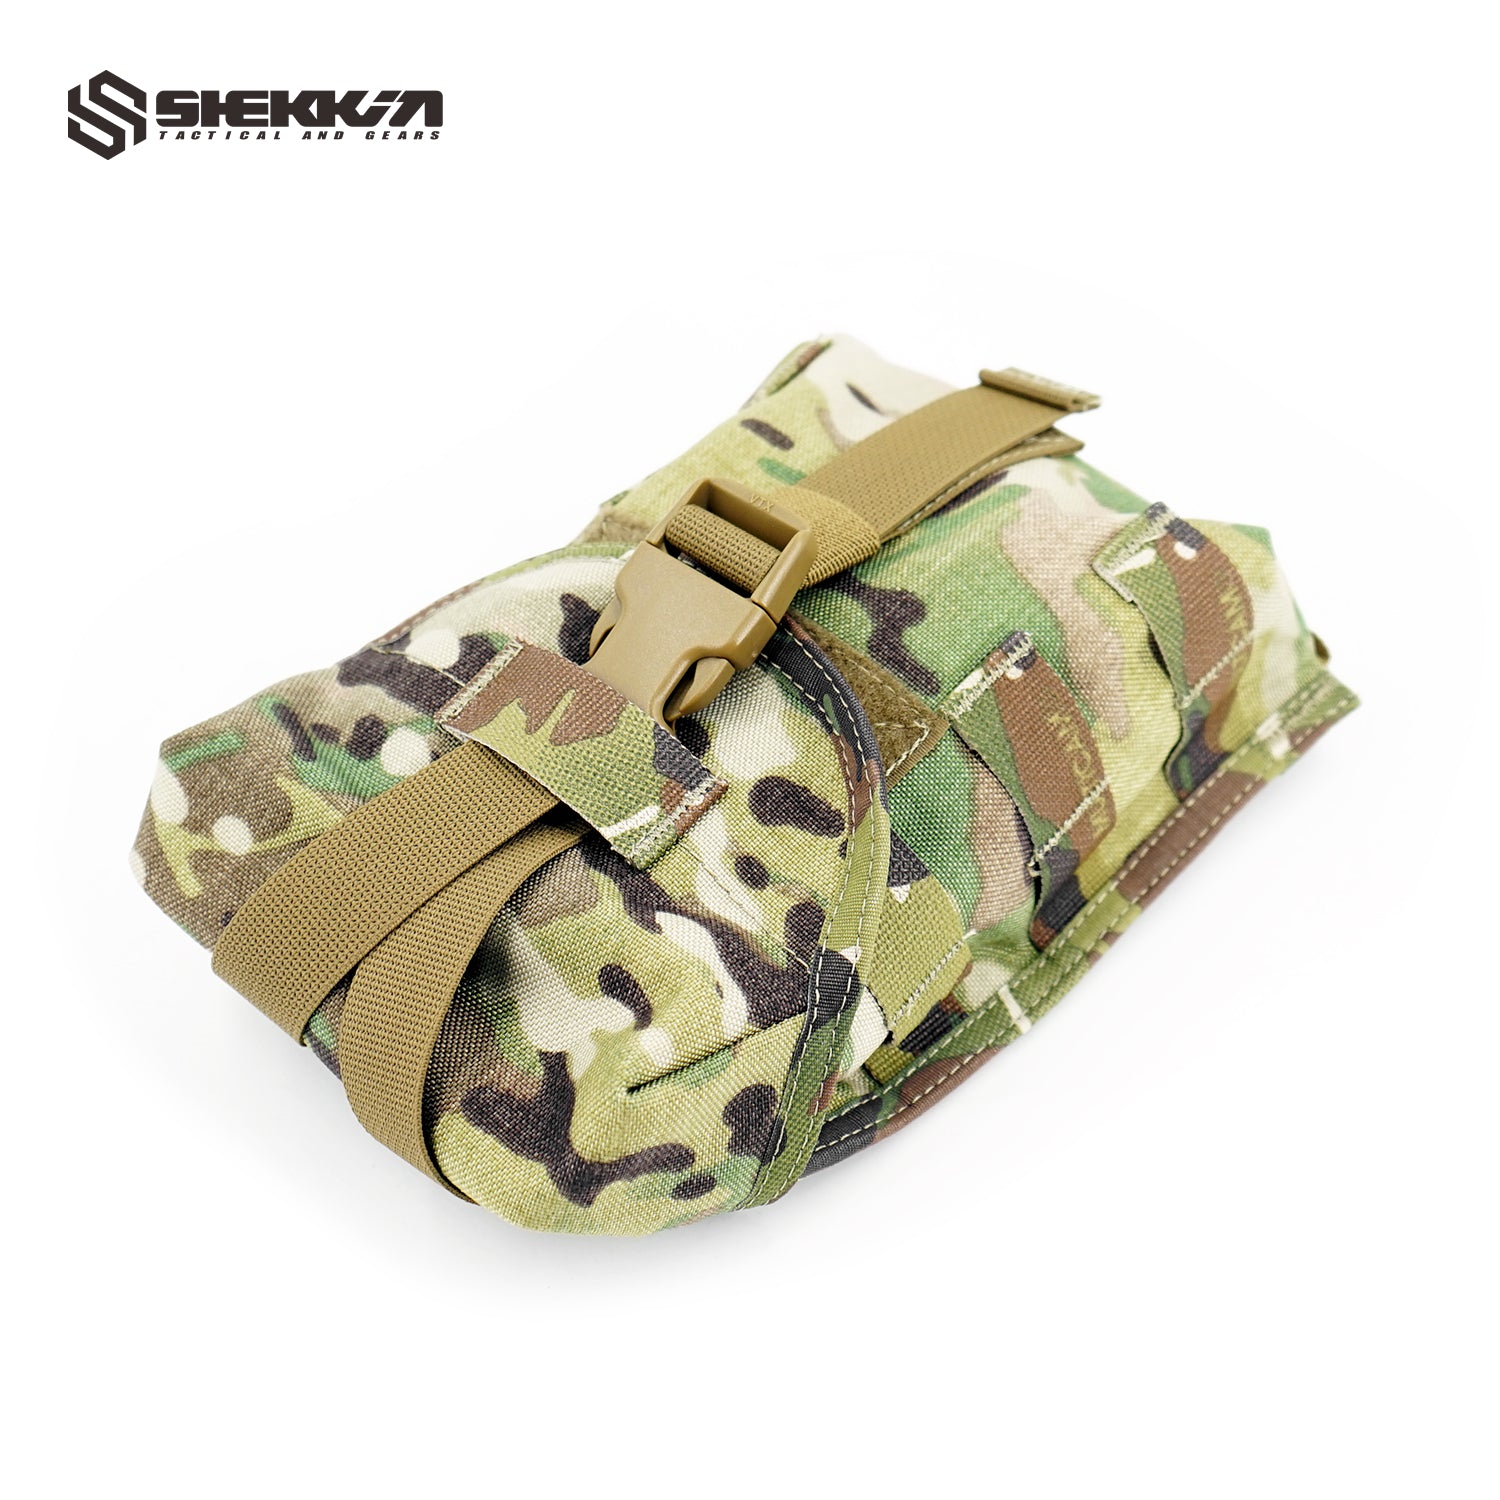 Paraclete style Multicam Canteen Pouch - Shekkin Gears